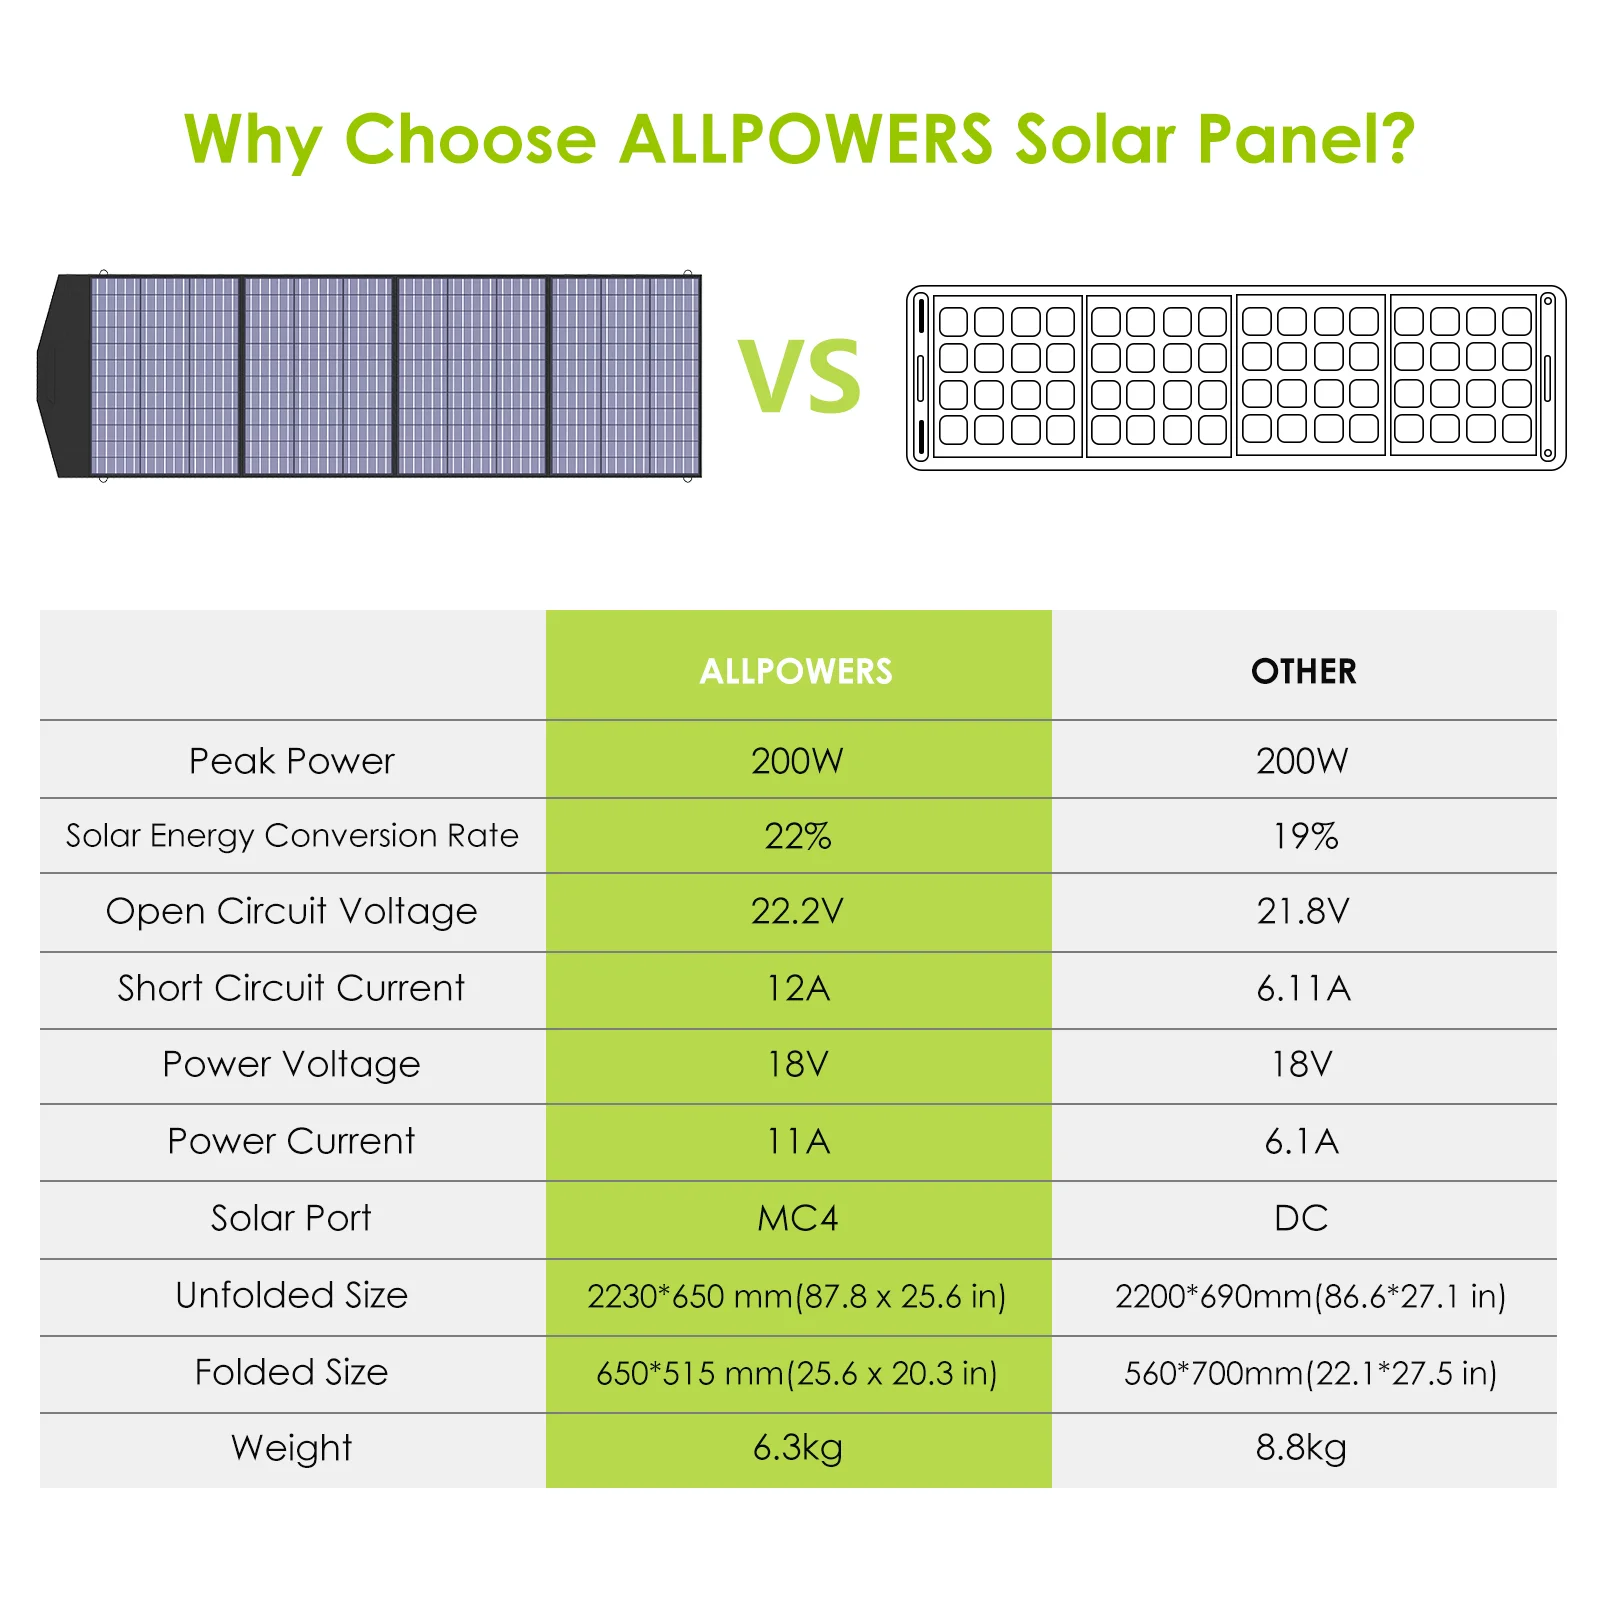 ALLPOWERS Solar Panel features high peak power, energy conversion rate, and compact size for outdoor use.